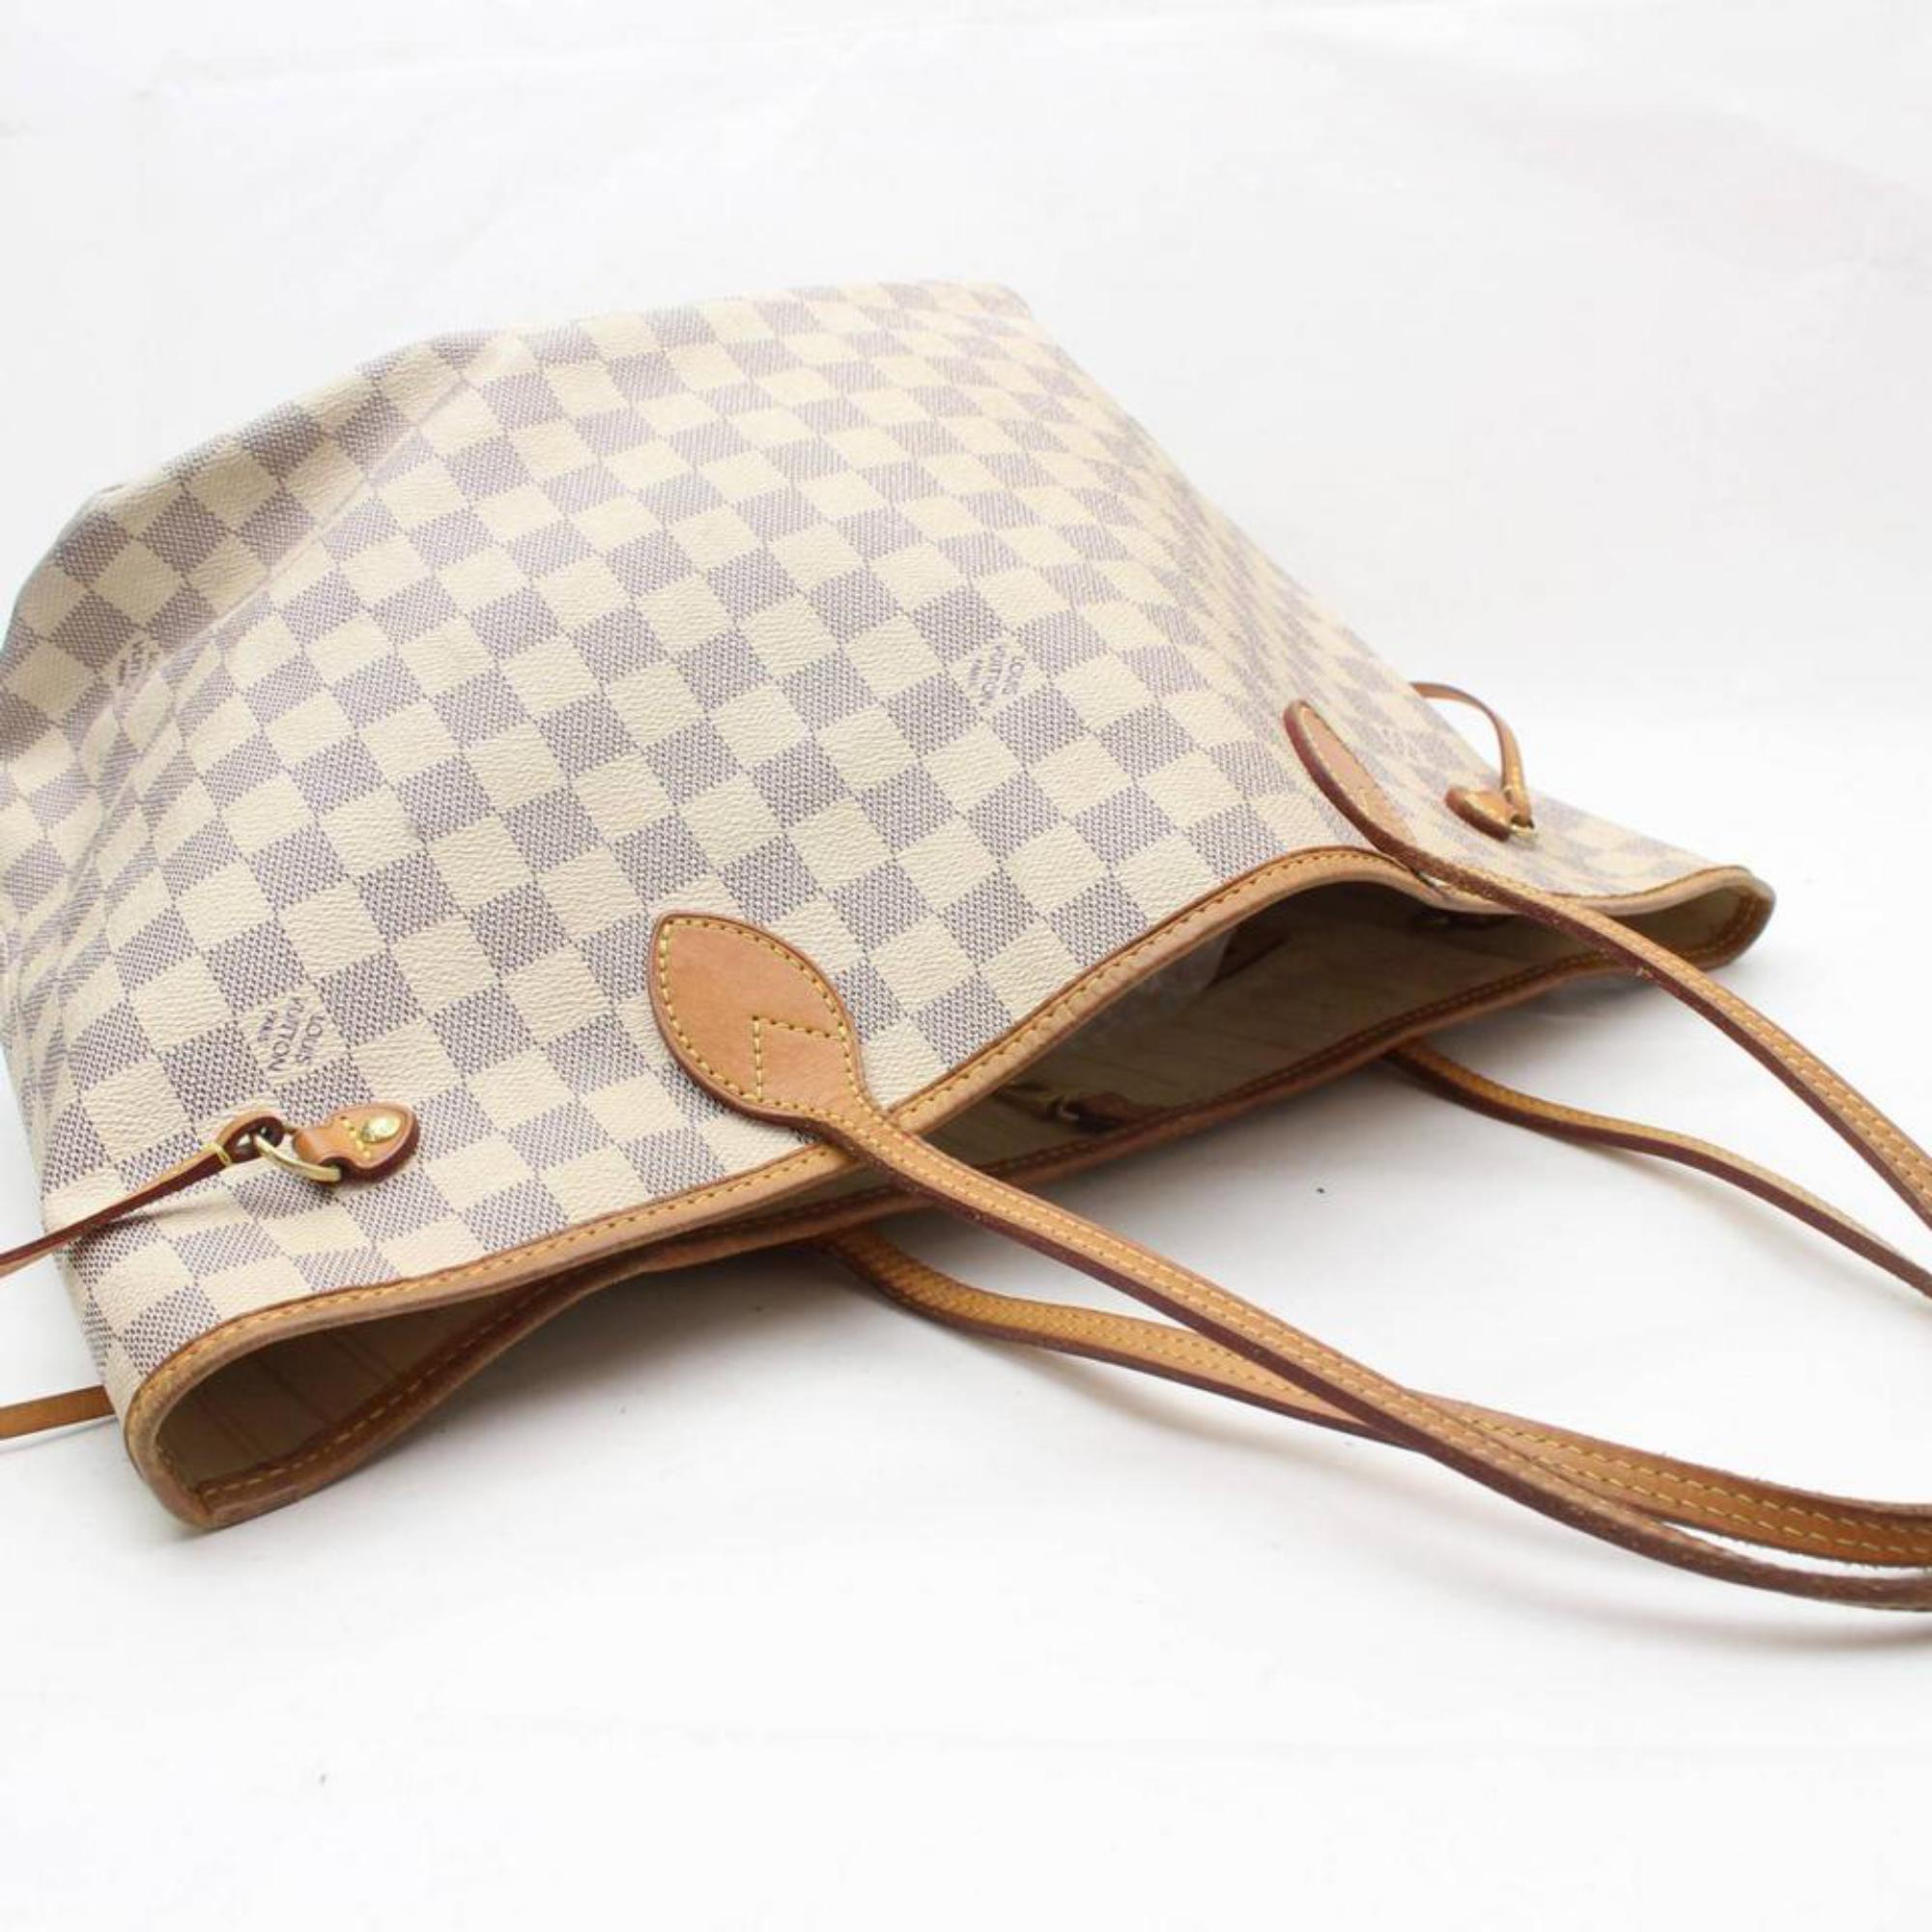 Louis Vuitton Neverfull Damier Azur Mm 868790 White Coated Canvas Tote For Sale 6